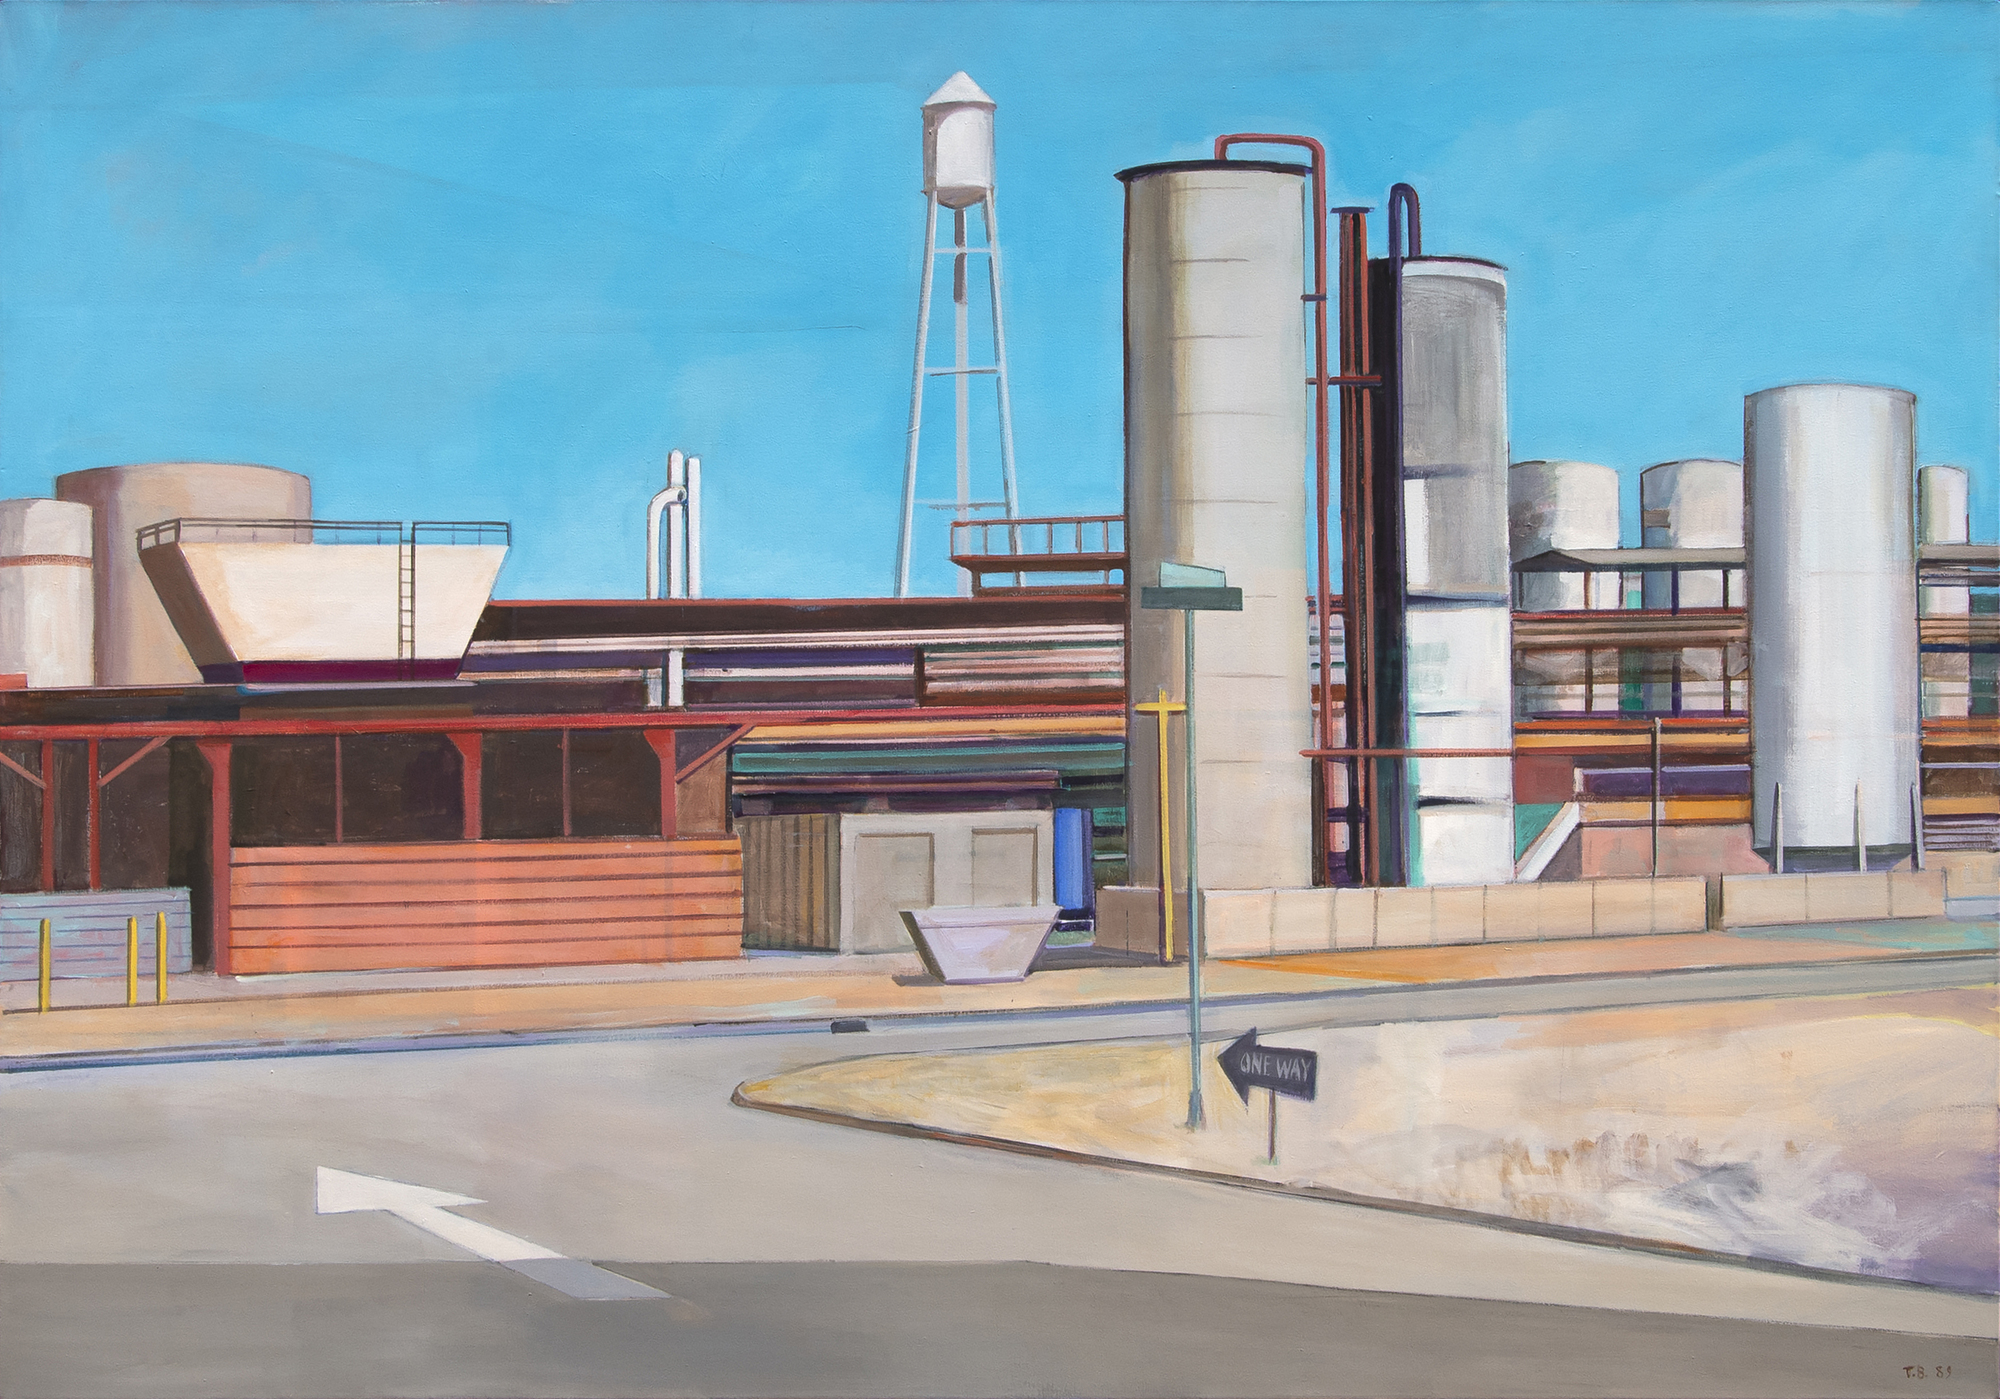 WILLIAM THEOPHILUS BROWN - Untitled (Industrial Landscape with One Way Street) - acrylic on canvas - 54 x 76 in.